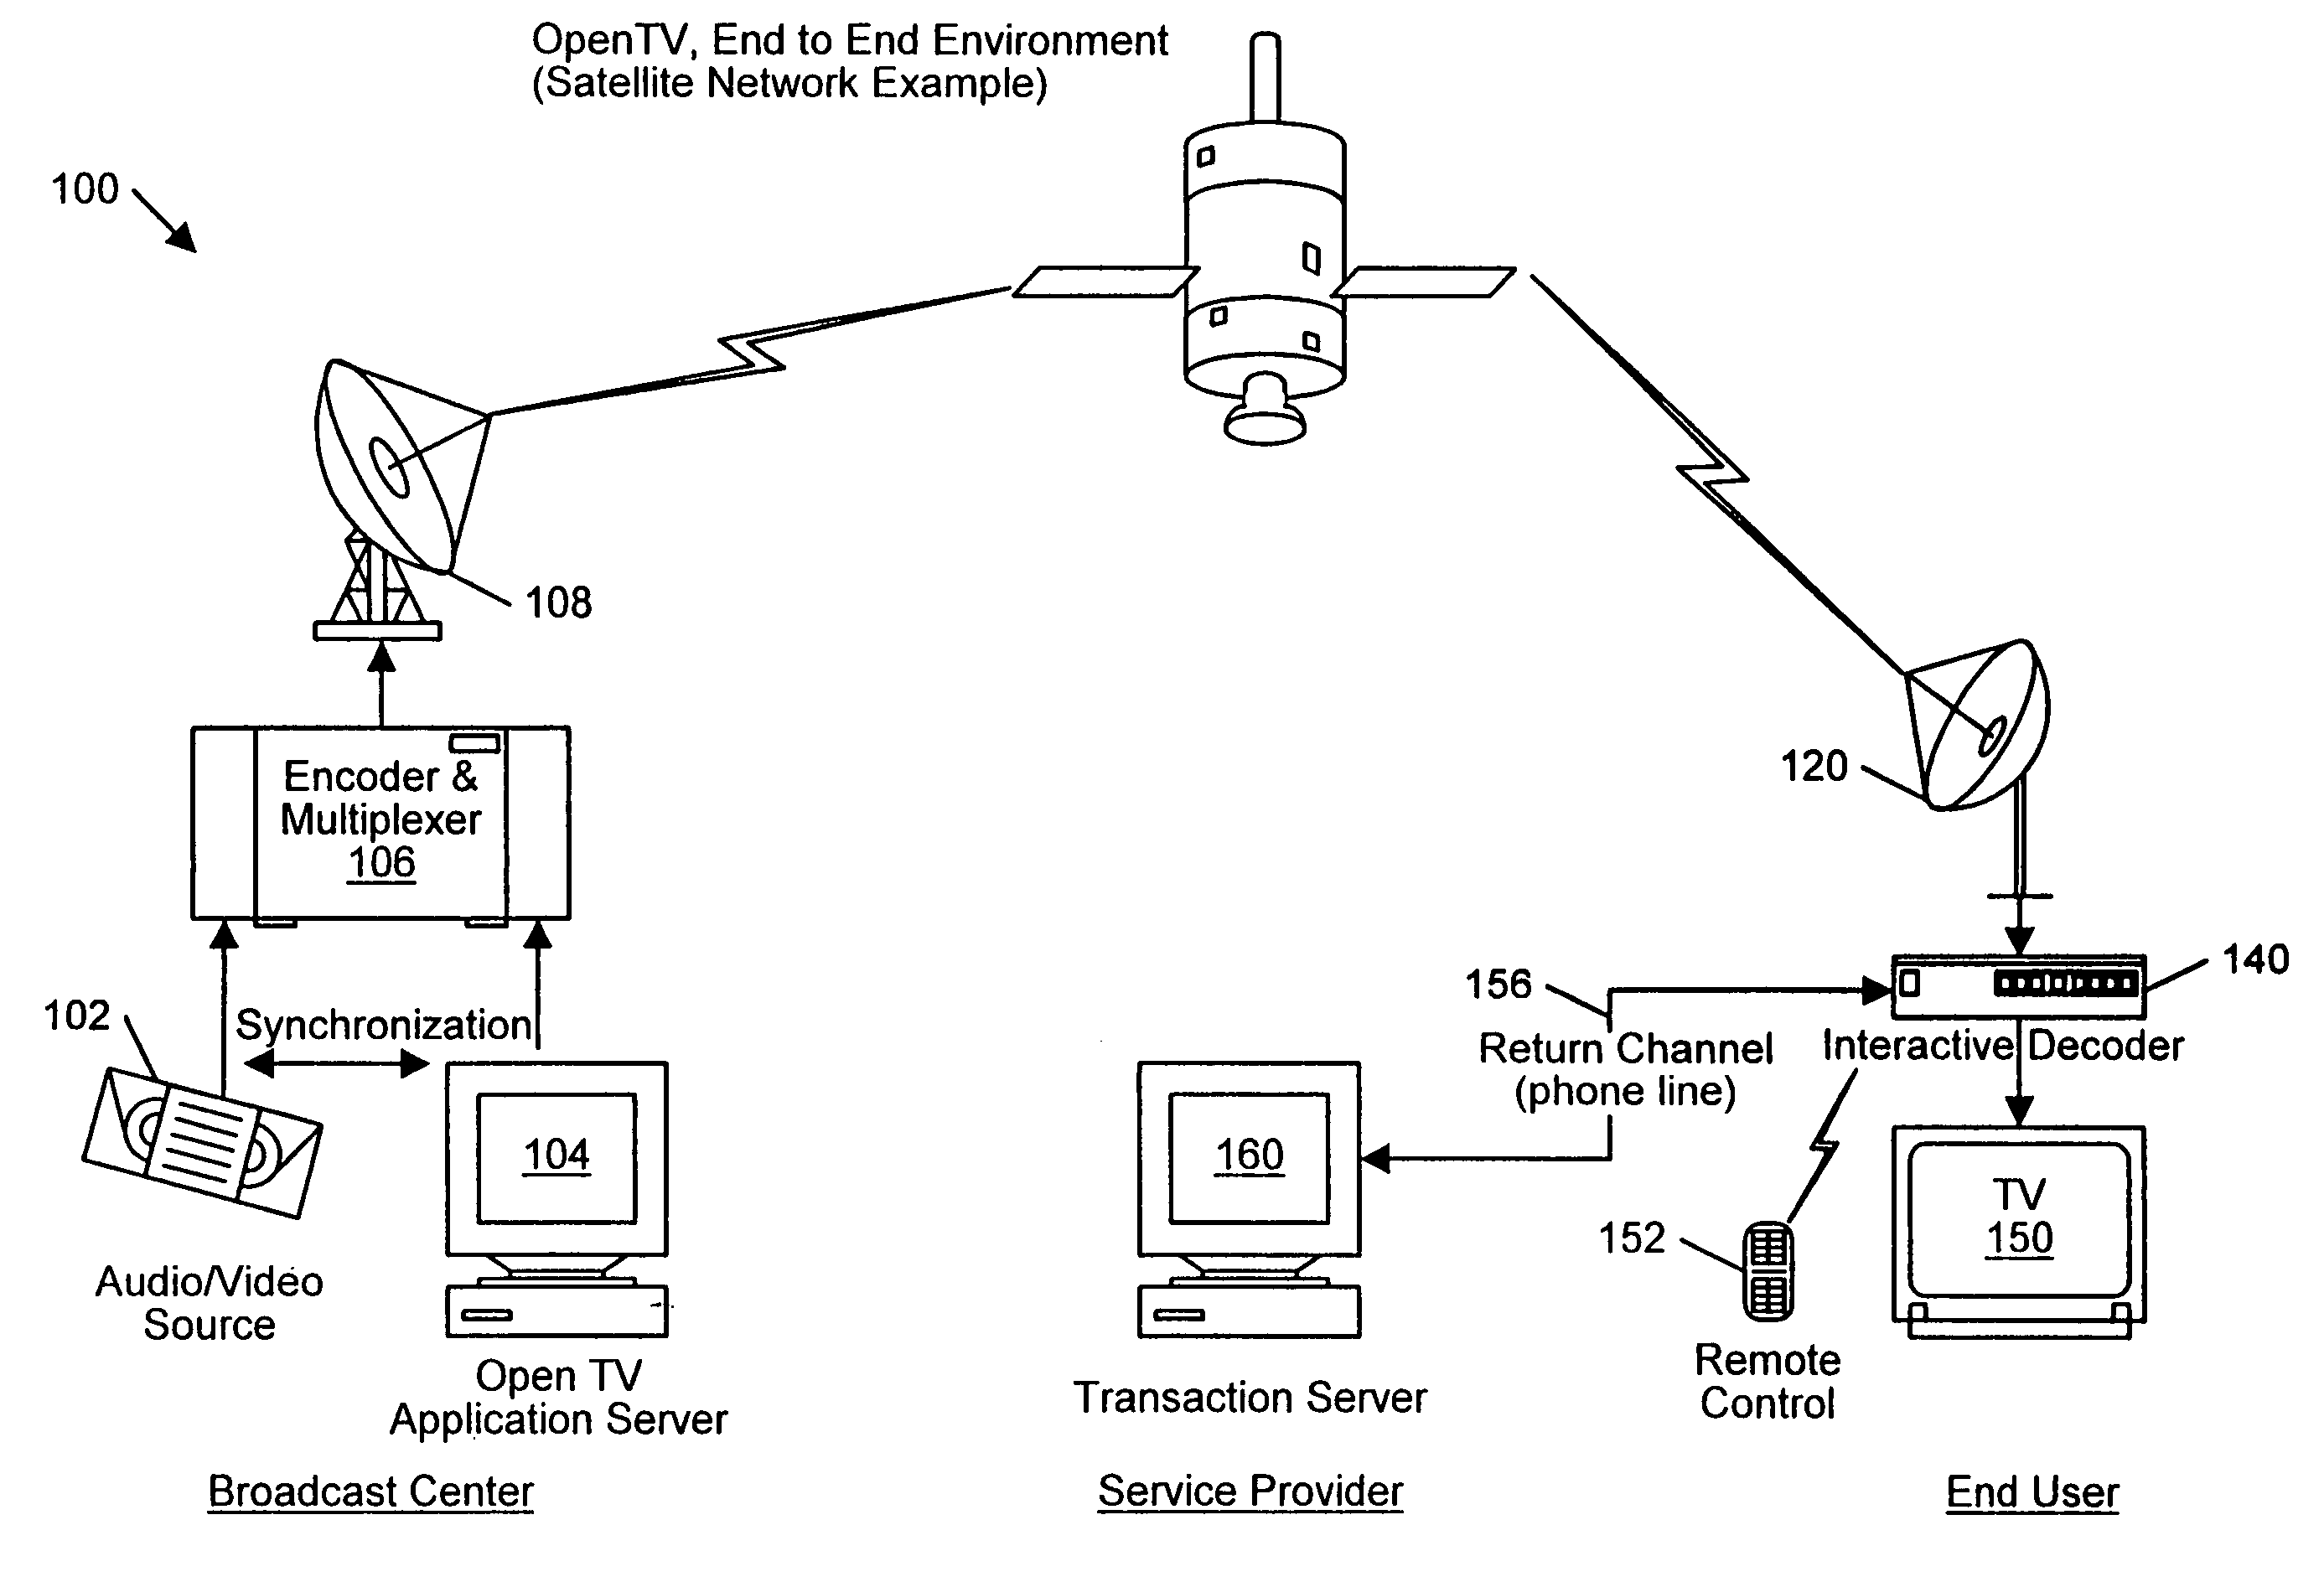 Interactive television system and method having on-demand web-like navigational capabilities for displaying requested hyperlinked web-like still images associated with television content